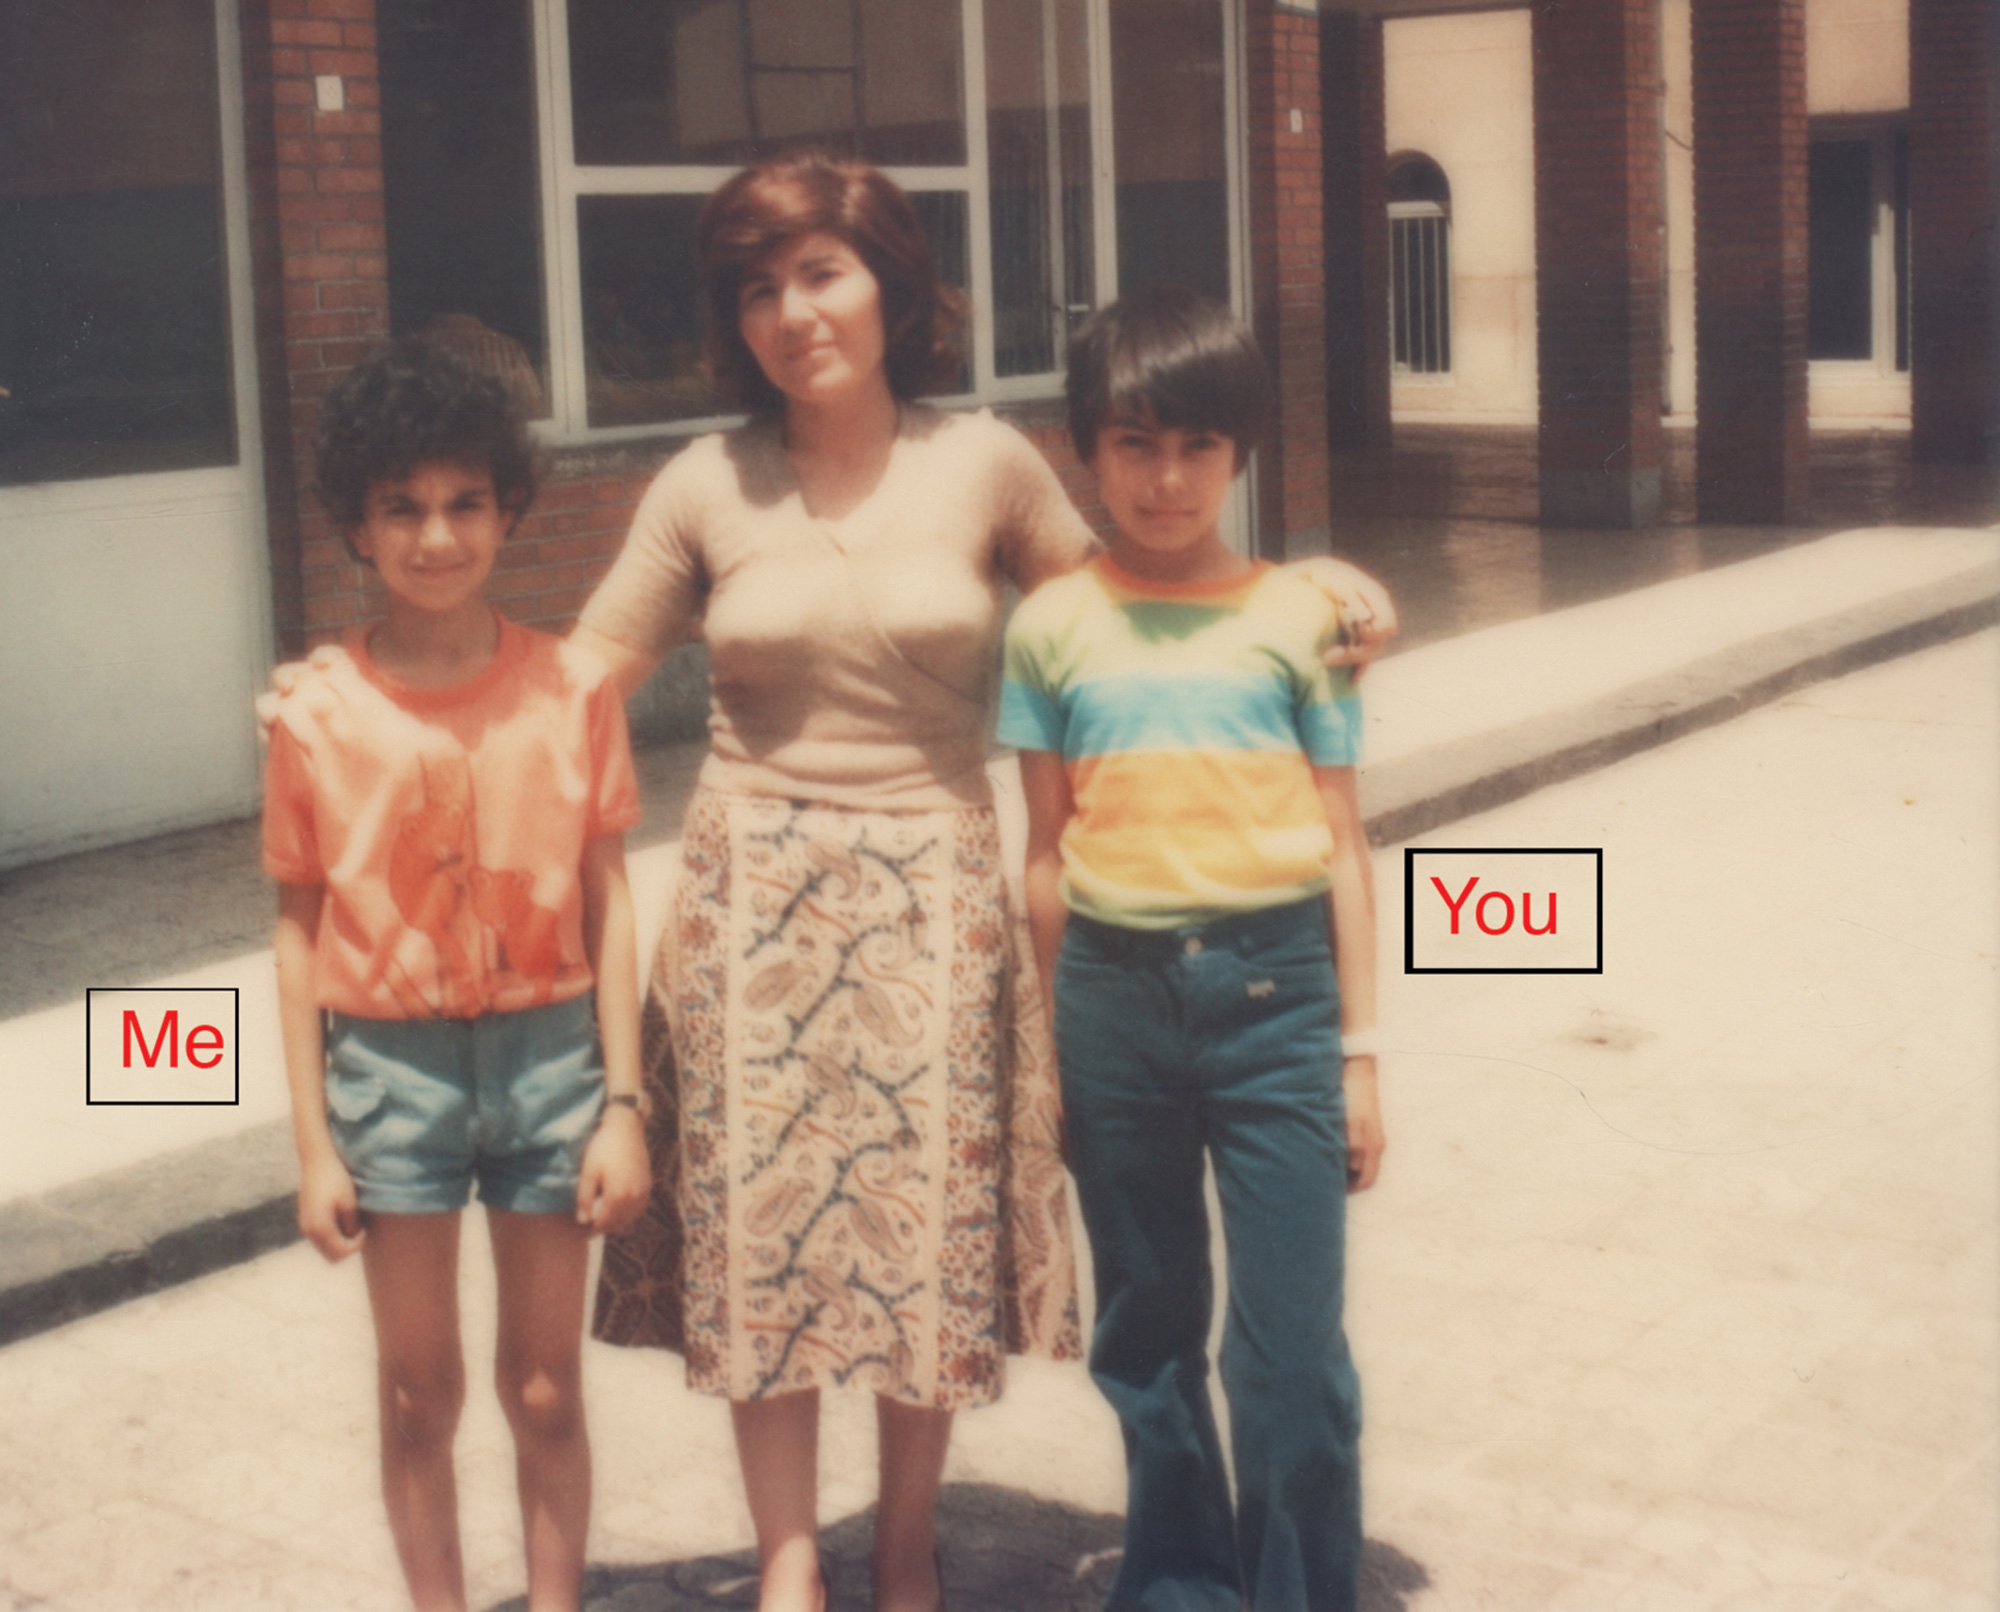 A photograph of two children labeled “ME” and “YOU.”